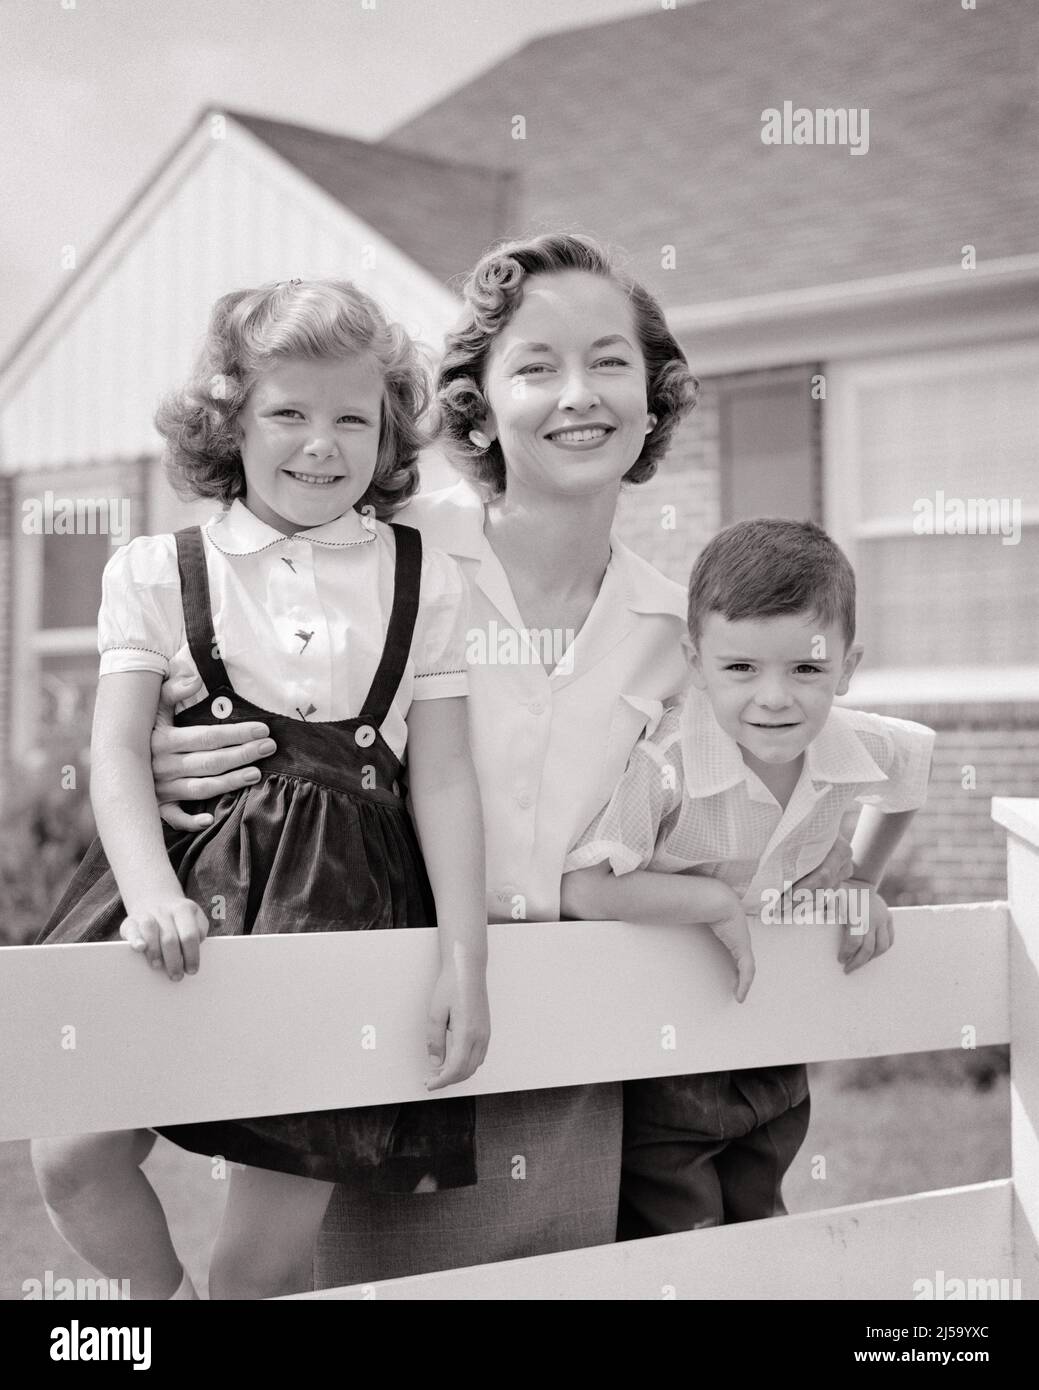 1950s PORTRAIT SMILING MOTHER AND TWO CHILDREN BOY AND GIRL LEANING ON WHITE FENCE IN FRONT OF SUBURBAN HOUSE LOOKING AT CAMERA - j6119 HAR001 HARS MOTHERS OLD TIME NOSTALGIA LEANING MEDIA OLD FASHION SISTER 1 JUVENILE SONS PLEASED FAMILIES JOY SATISFACTION FEMALES HOUSES HEALTHINESS HOME LIFE FRIENDSHIP HALF-LENGTH LADIES DAUGHTERS PERSONS RESIDENTIAL CUTOUT MALES BUILDINGS CONFIDENCE SISTERS B&W EYE CONTACT HAPPINESS CHEERFUL AND PRIDE HOMES SMILES CONNECTION JOYFUL RESIDENCE COOPERATION GROWTH MID-ADULT MOMS TOGETHERNESS BLACK AND WHITE HAR001 OLD FASHIONED Stock Photo